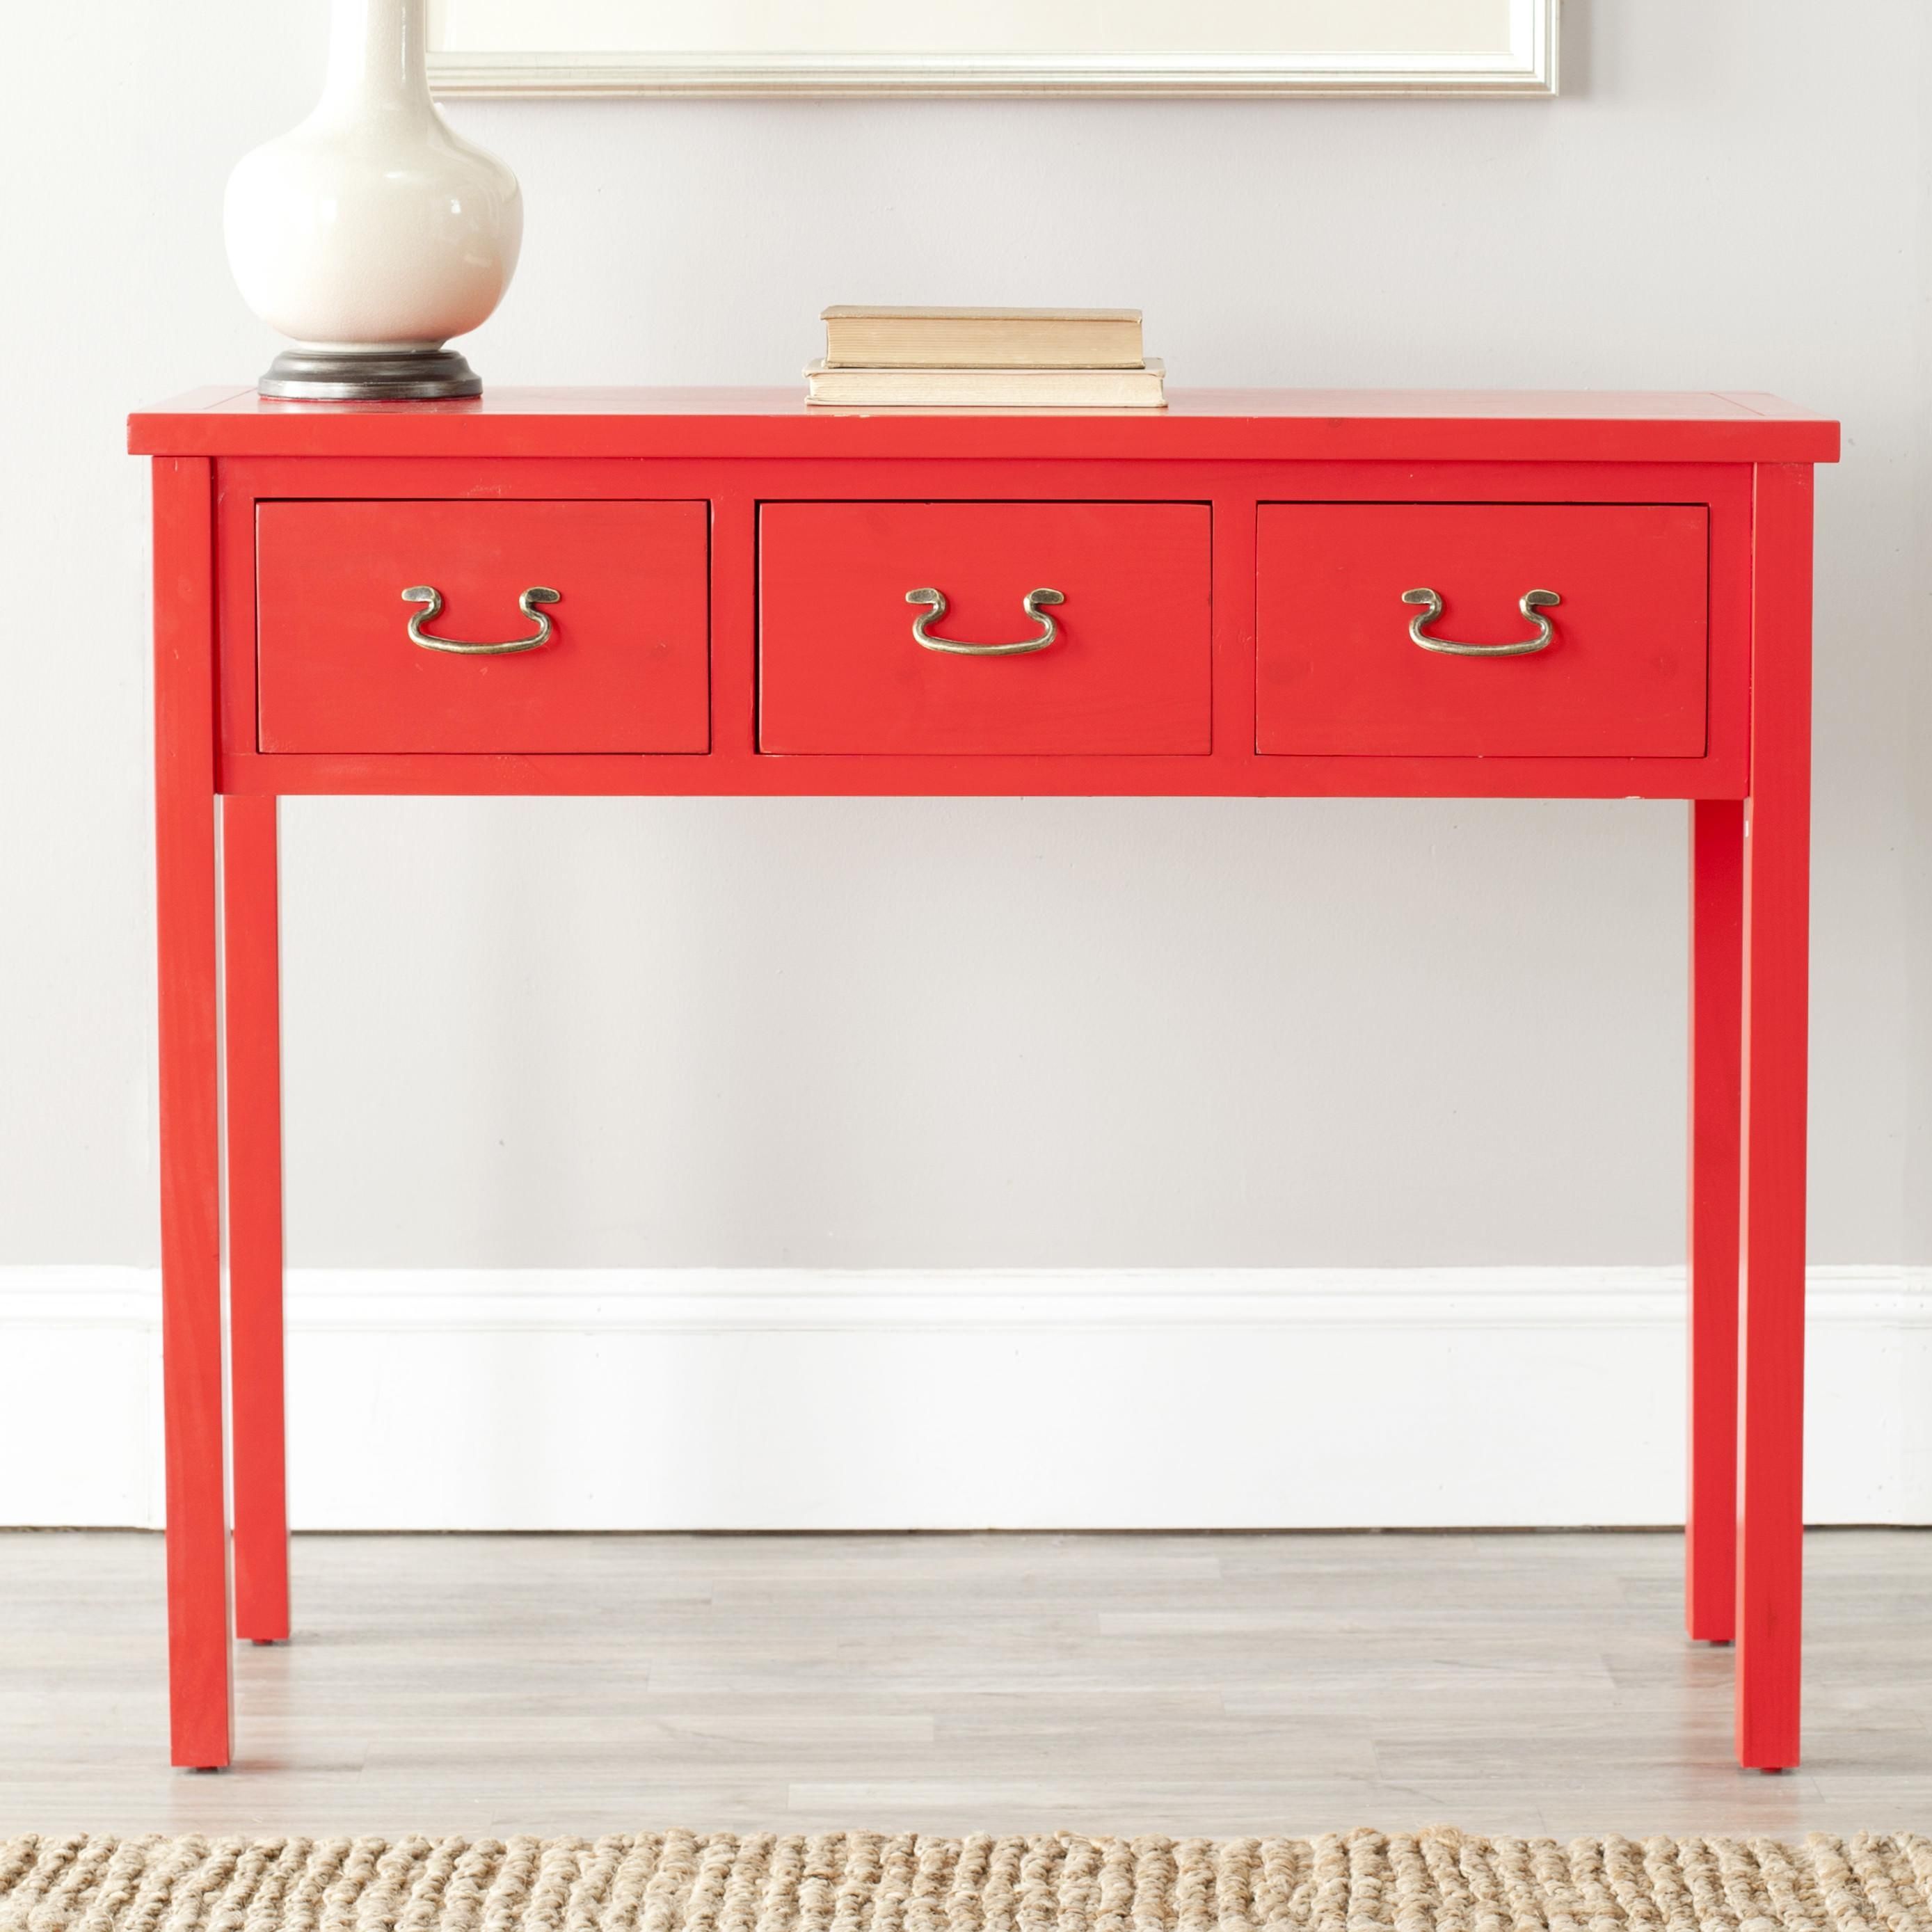 Sofas Center : Red Sofa Table With Drawers And Open Shelf Or Regarding Red Sofa Tables (View 8 of 20)